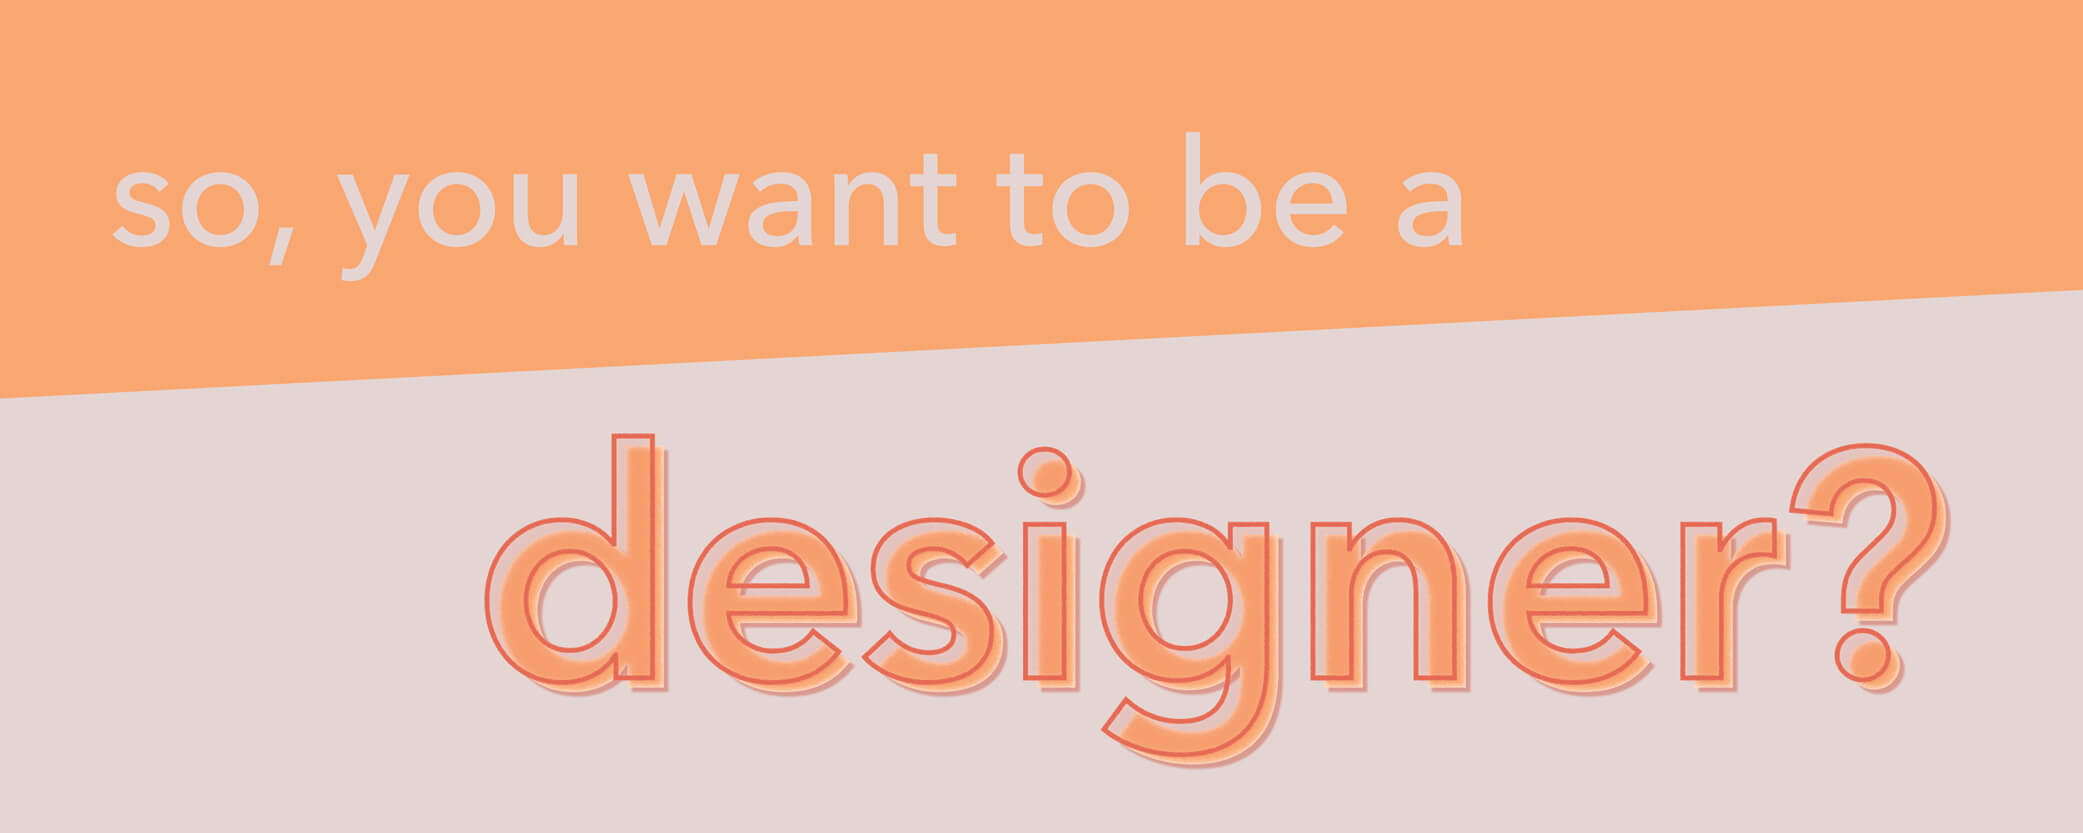 So you want to be a designer blog title.